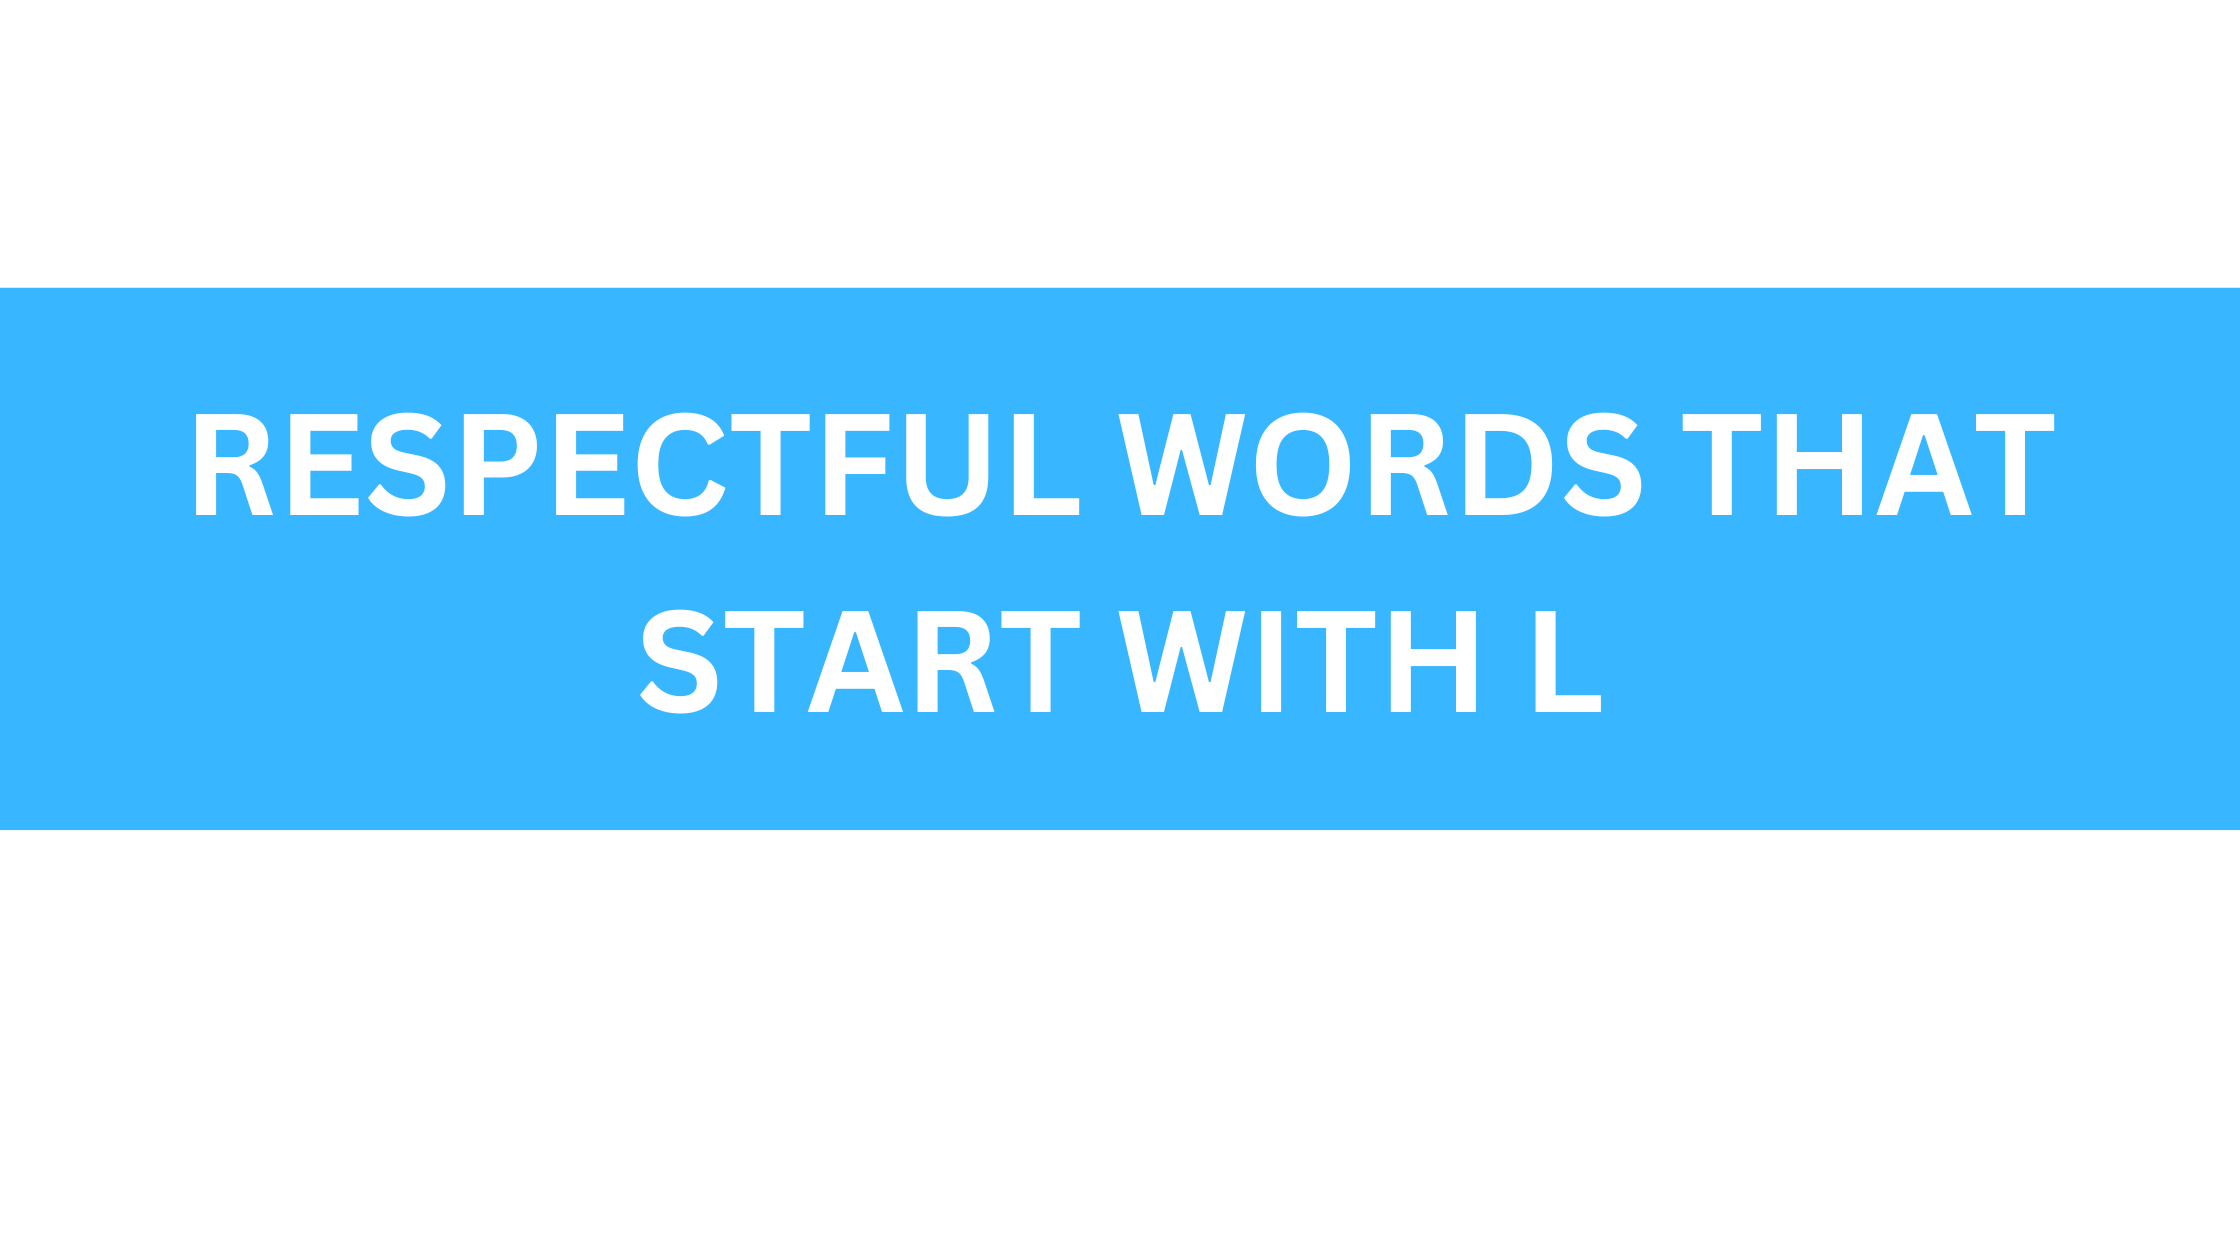 respectful words that start with l